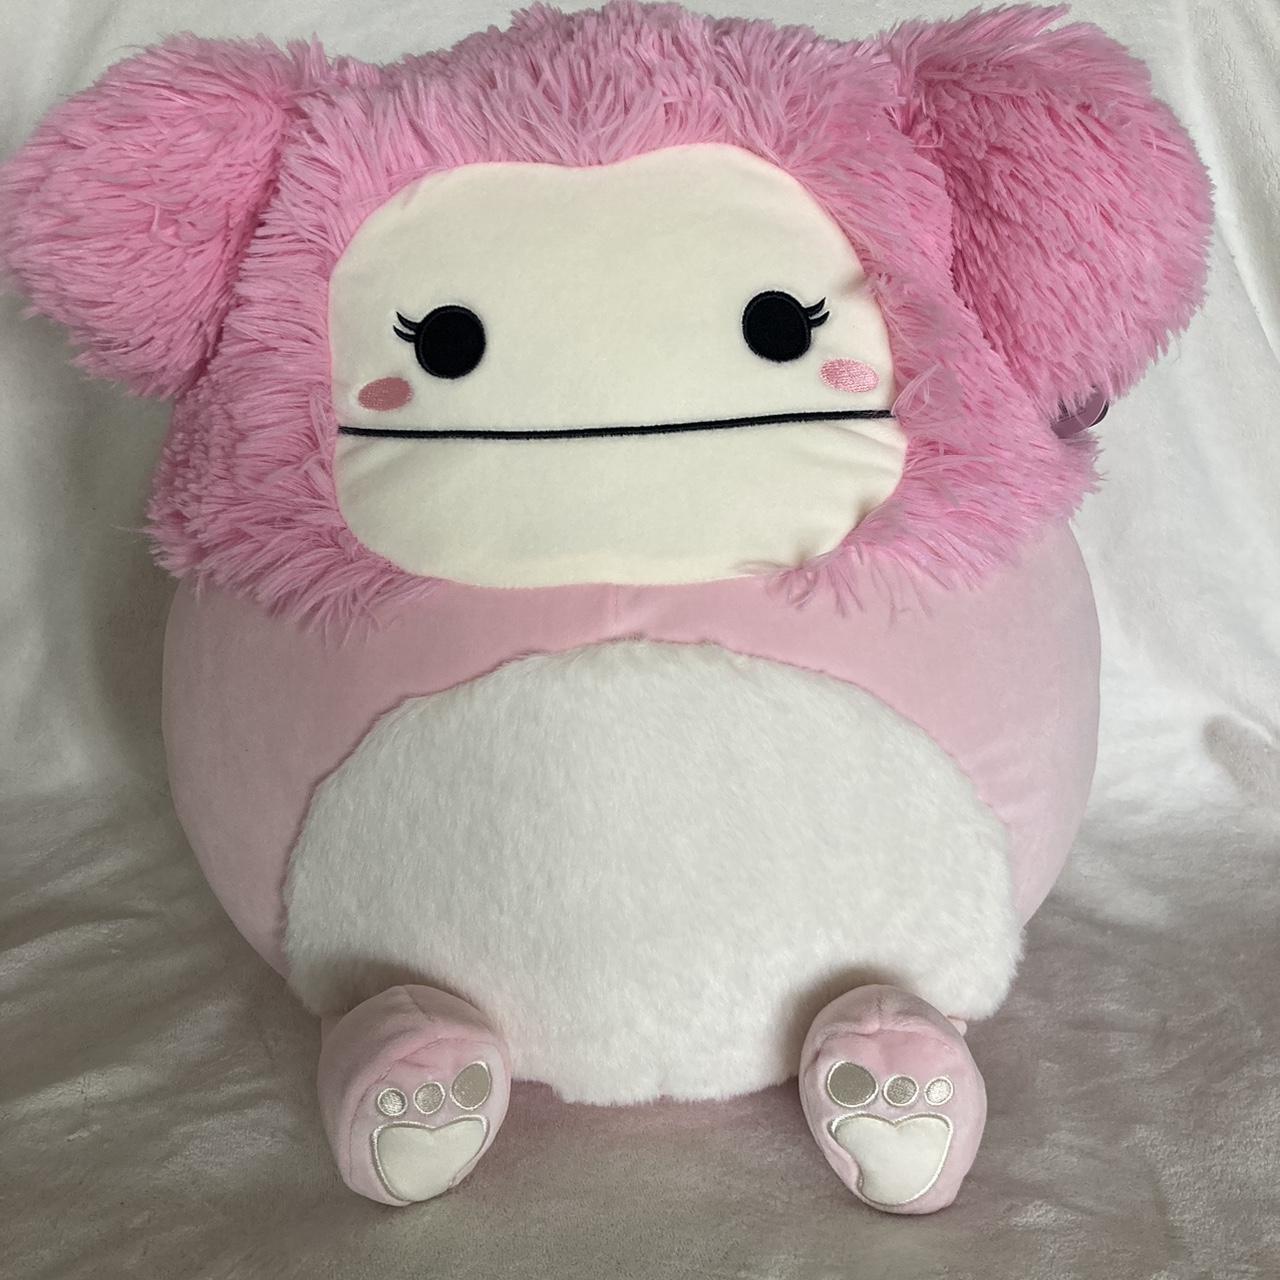 Squishmallows White and Pink Stuffed-animals | Depop